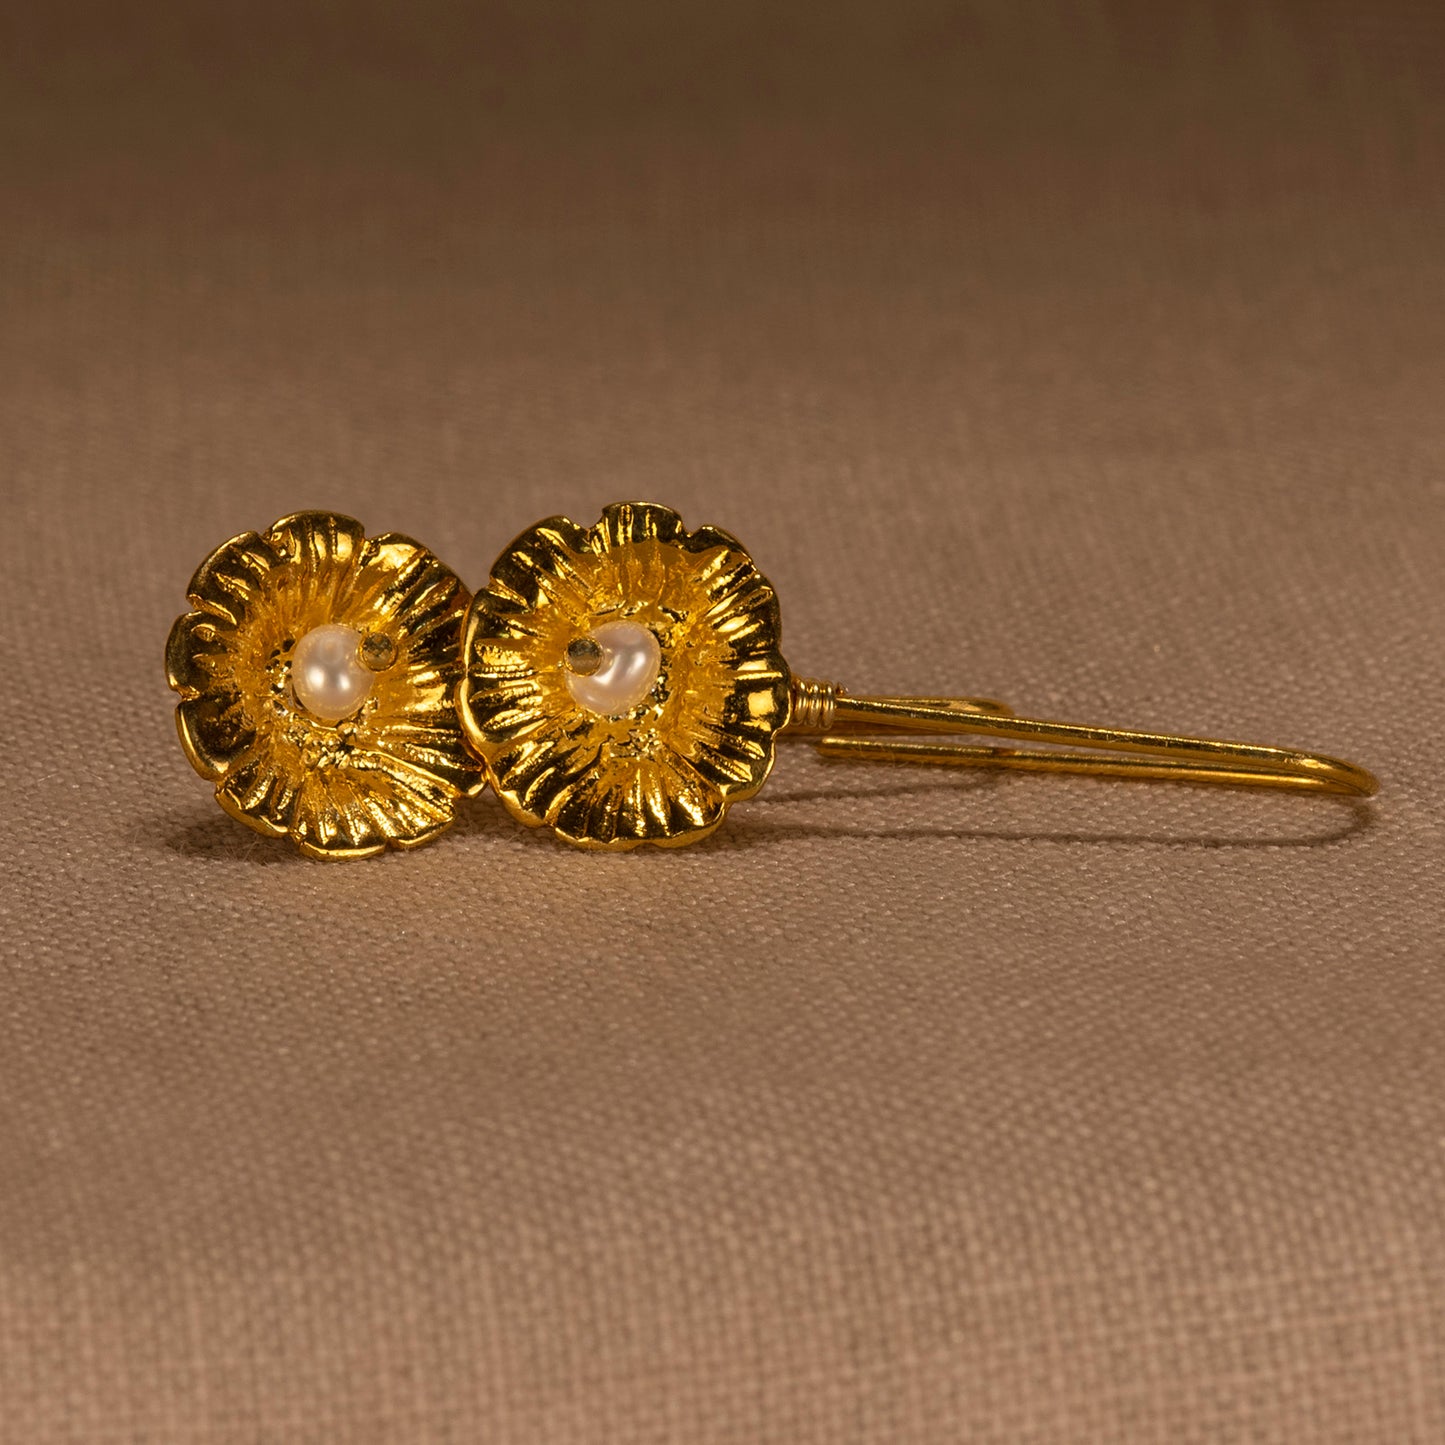 "Anemone" Gold plated silver earrings with pearls